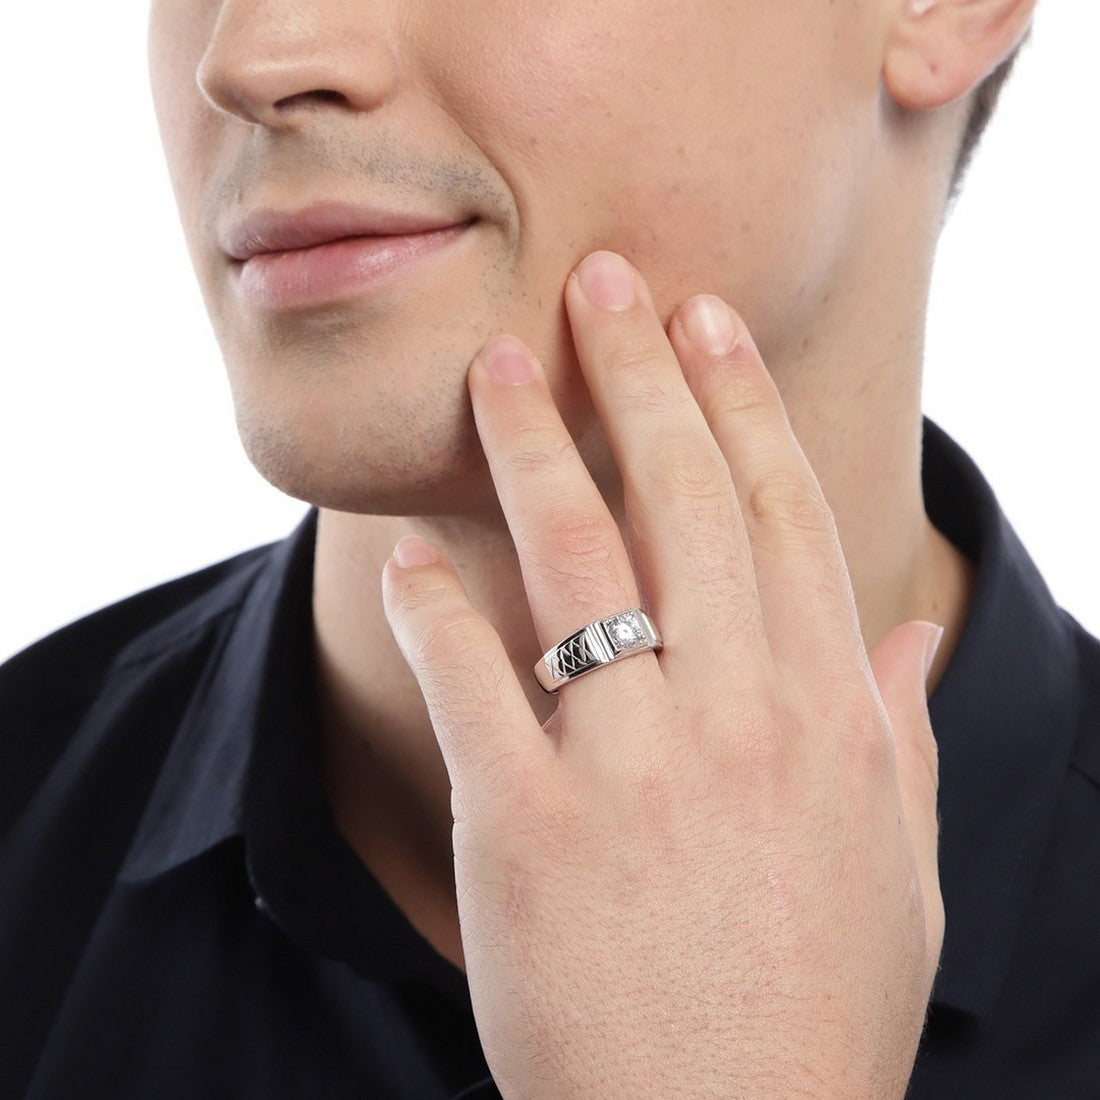 Elegant Solitaire 925 Sterling Silver Ring for Him